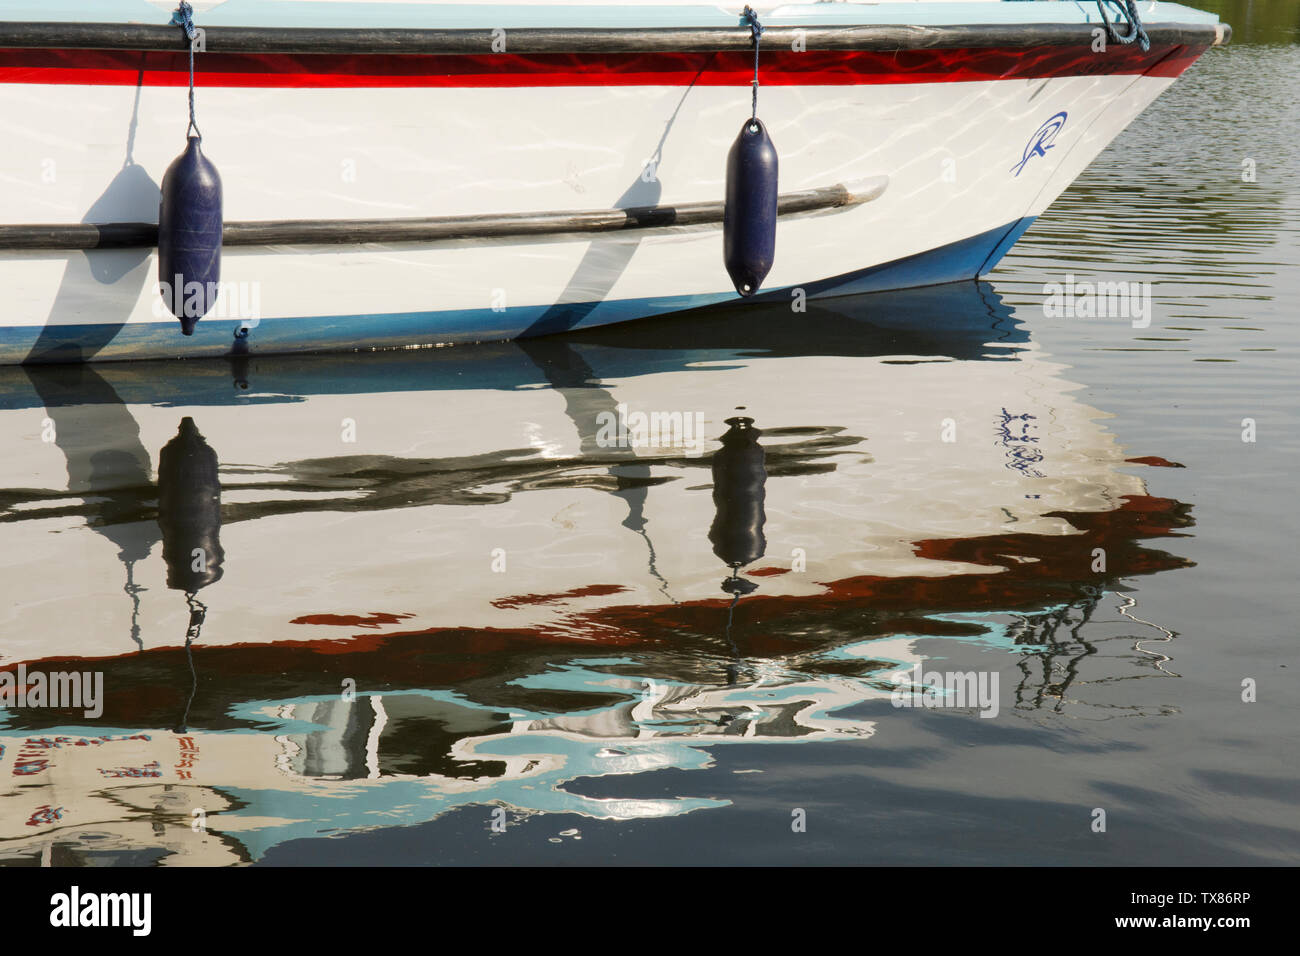 reflection on ripples on water of motor cruiser, boat, holiday boat, the Norfolk Broads, UK, mirror image. Stock Photo